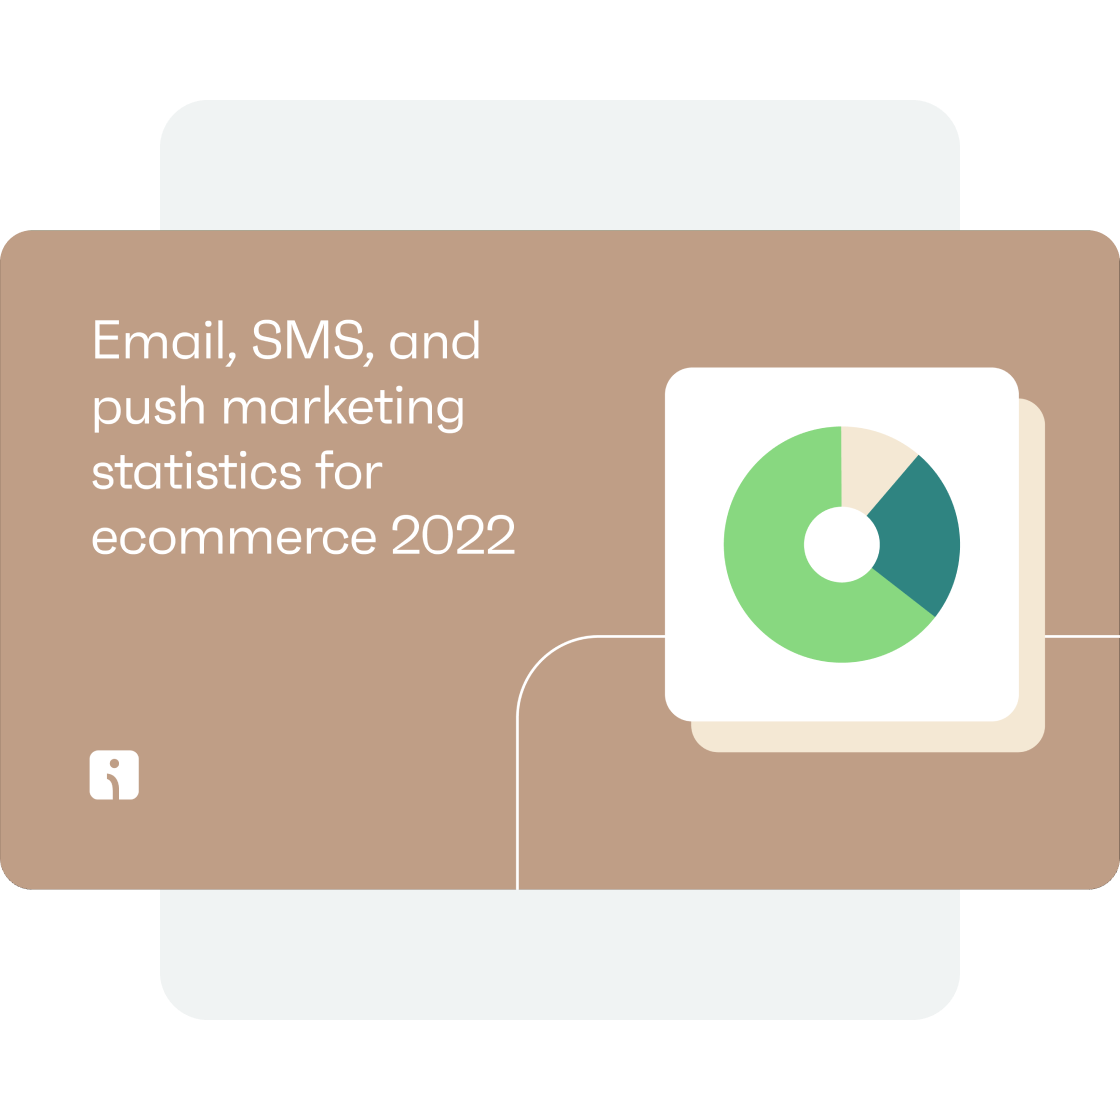 Email, SMS, and push marketing statistics for ecommerce 2022